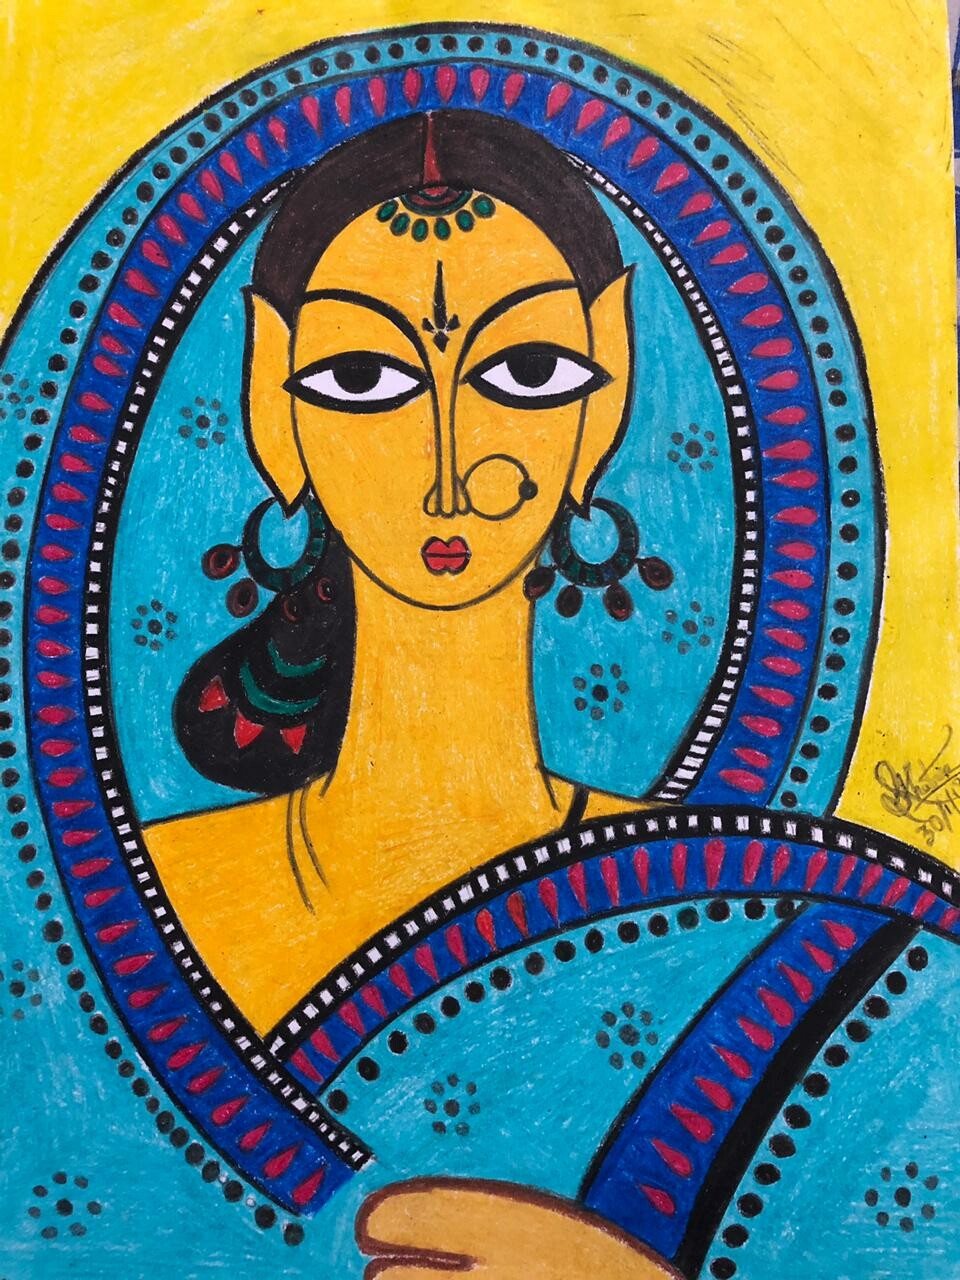 Tallenge - Woman - Jamini Roy - Monochrome Painting - Medium Framed  Canvas(Canvas,18 x 24 inches, MultiColour) : Amazon.in: Home & Kitchen